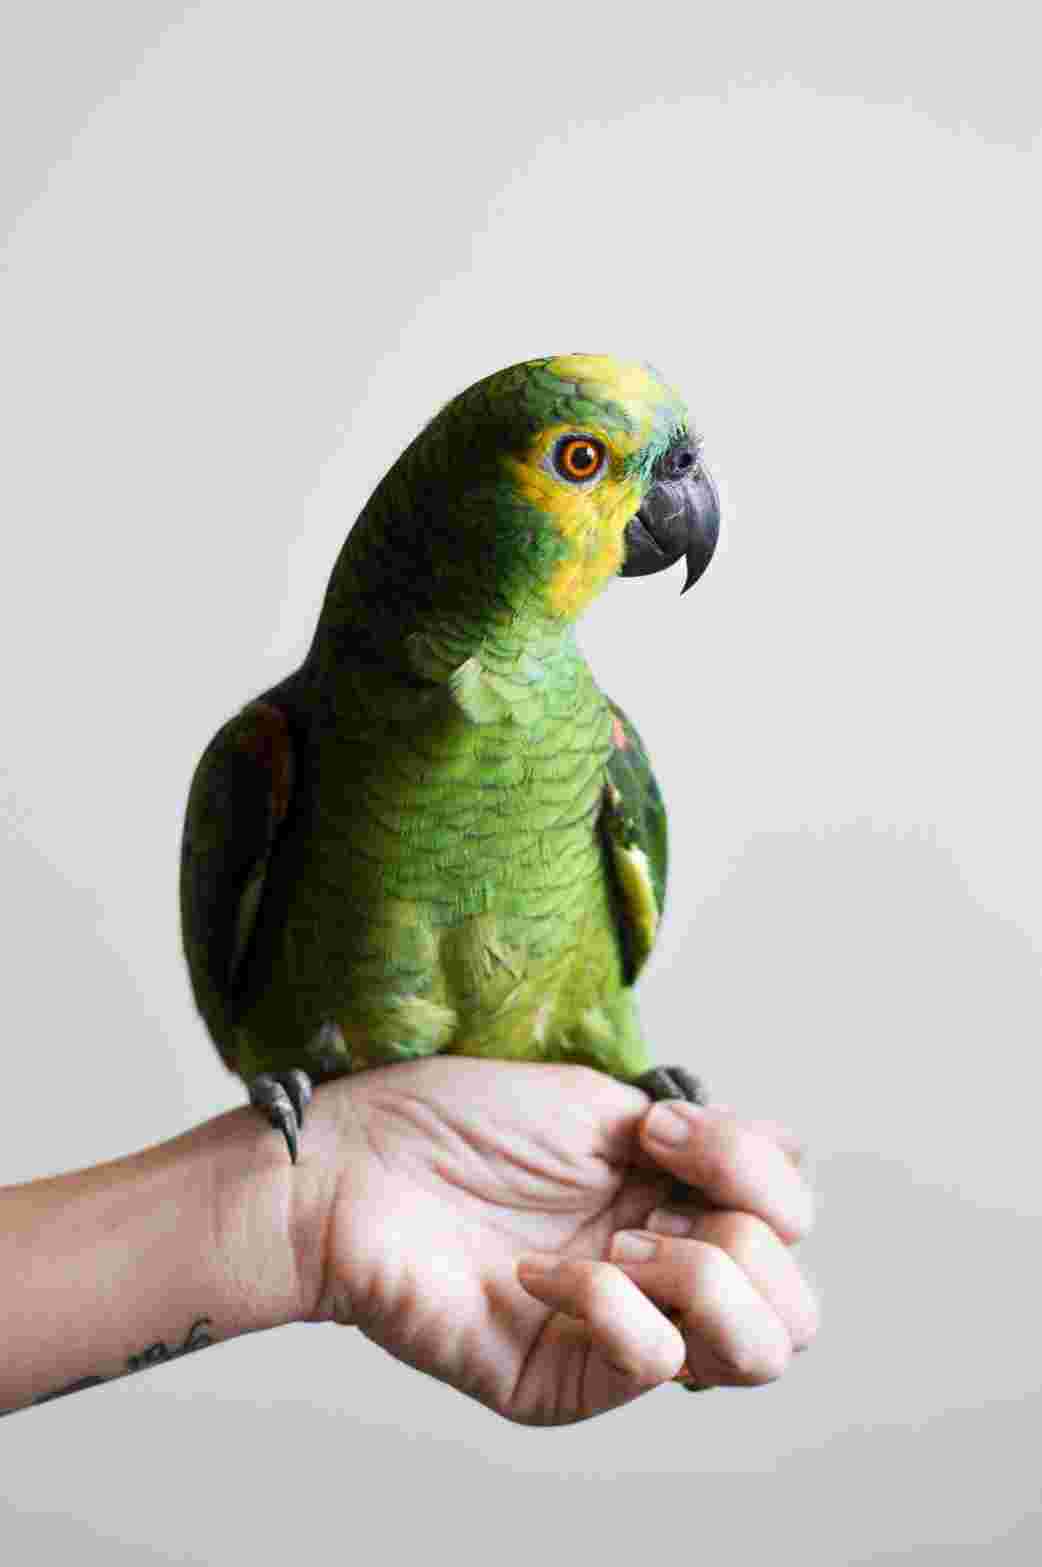 I wanted a parrot as a pet.